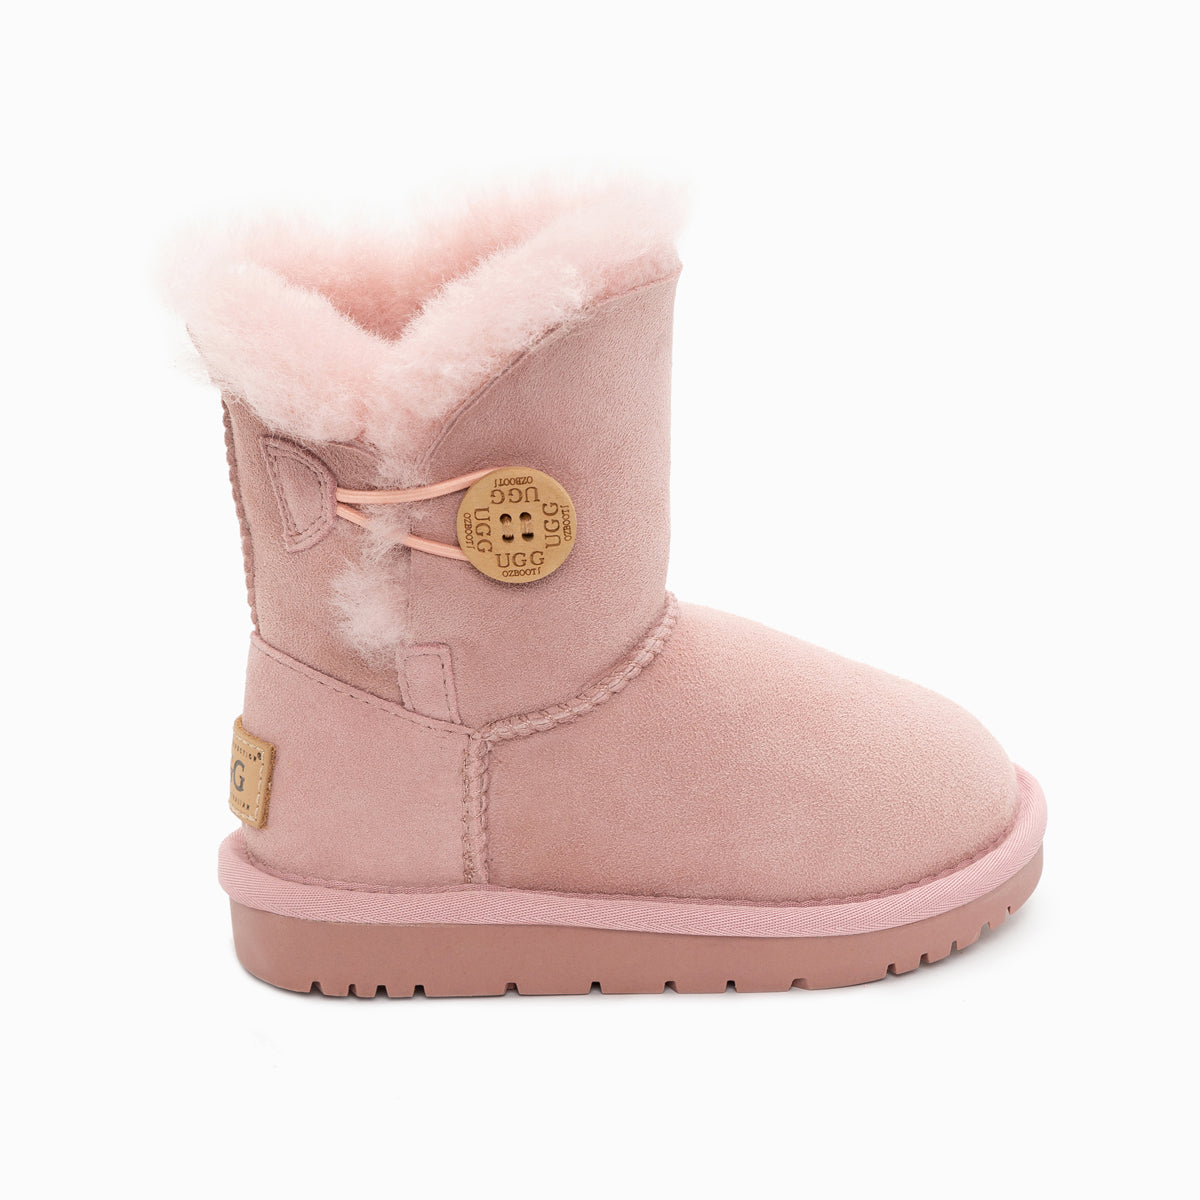 Ugg Kids Ugg Button Boots (Water Resistant)-Kid Boots-PEROZ Accessories